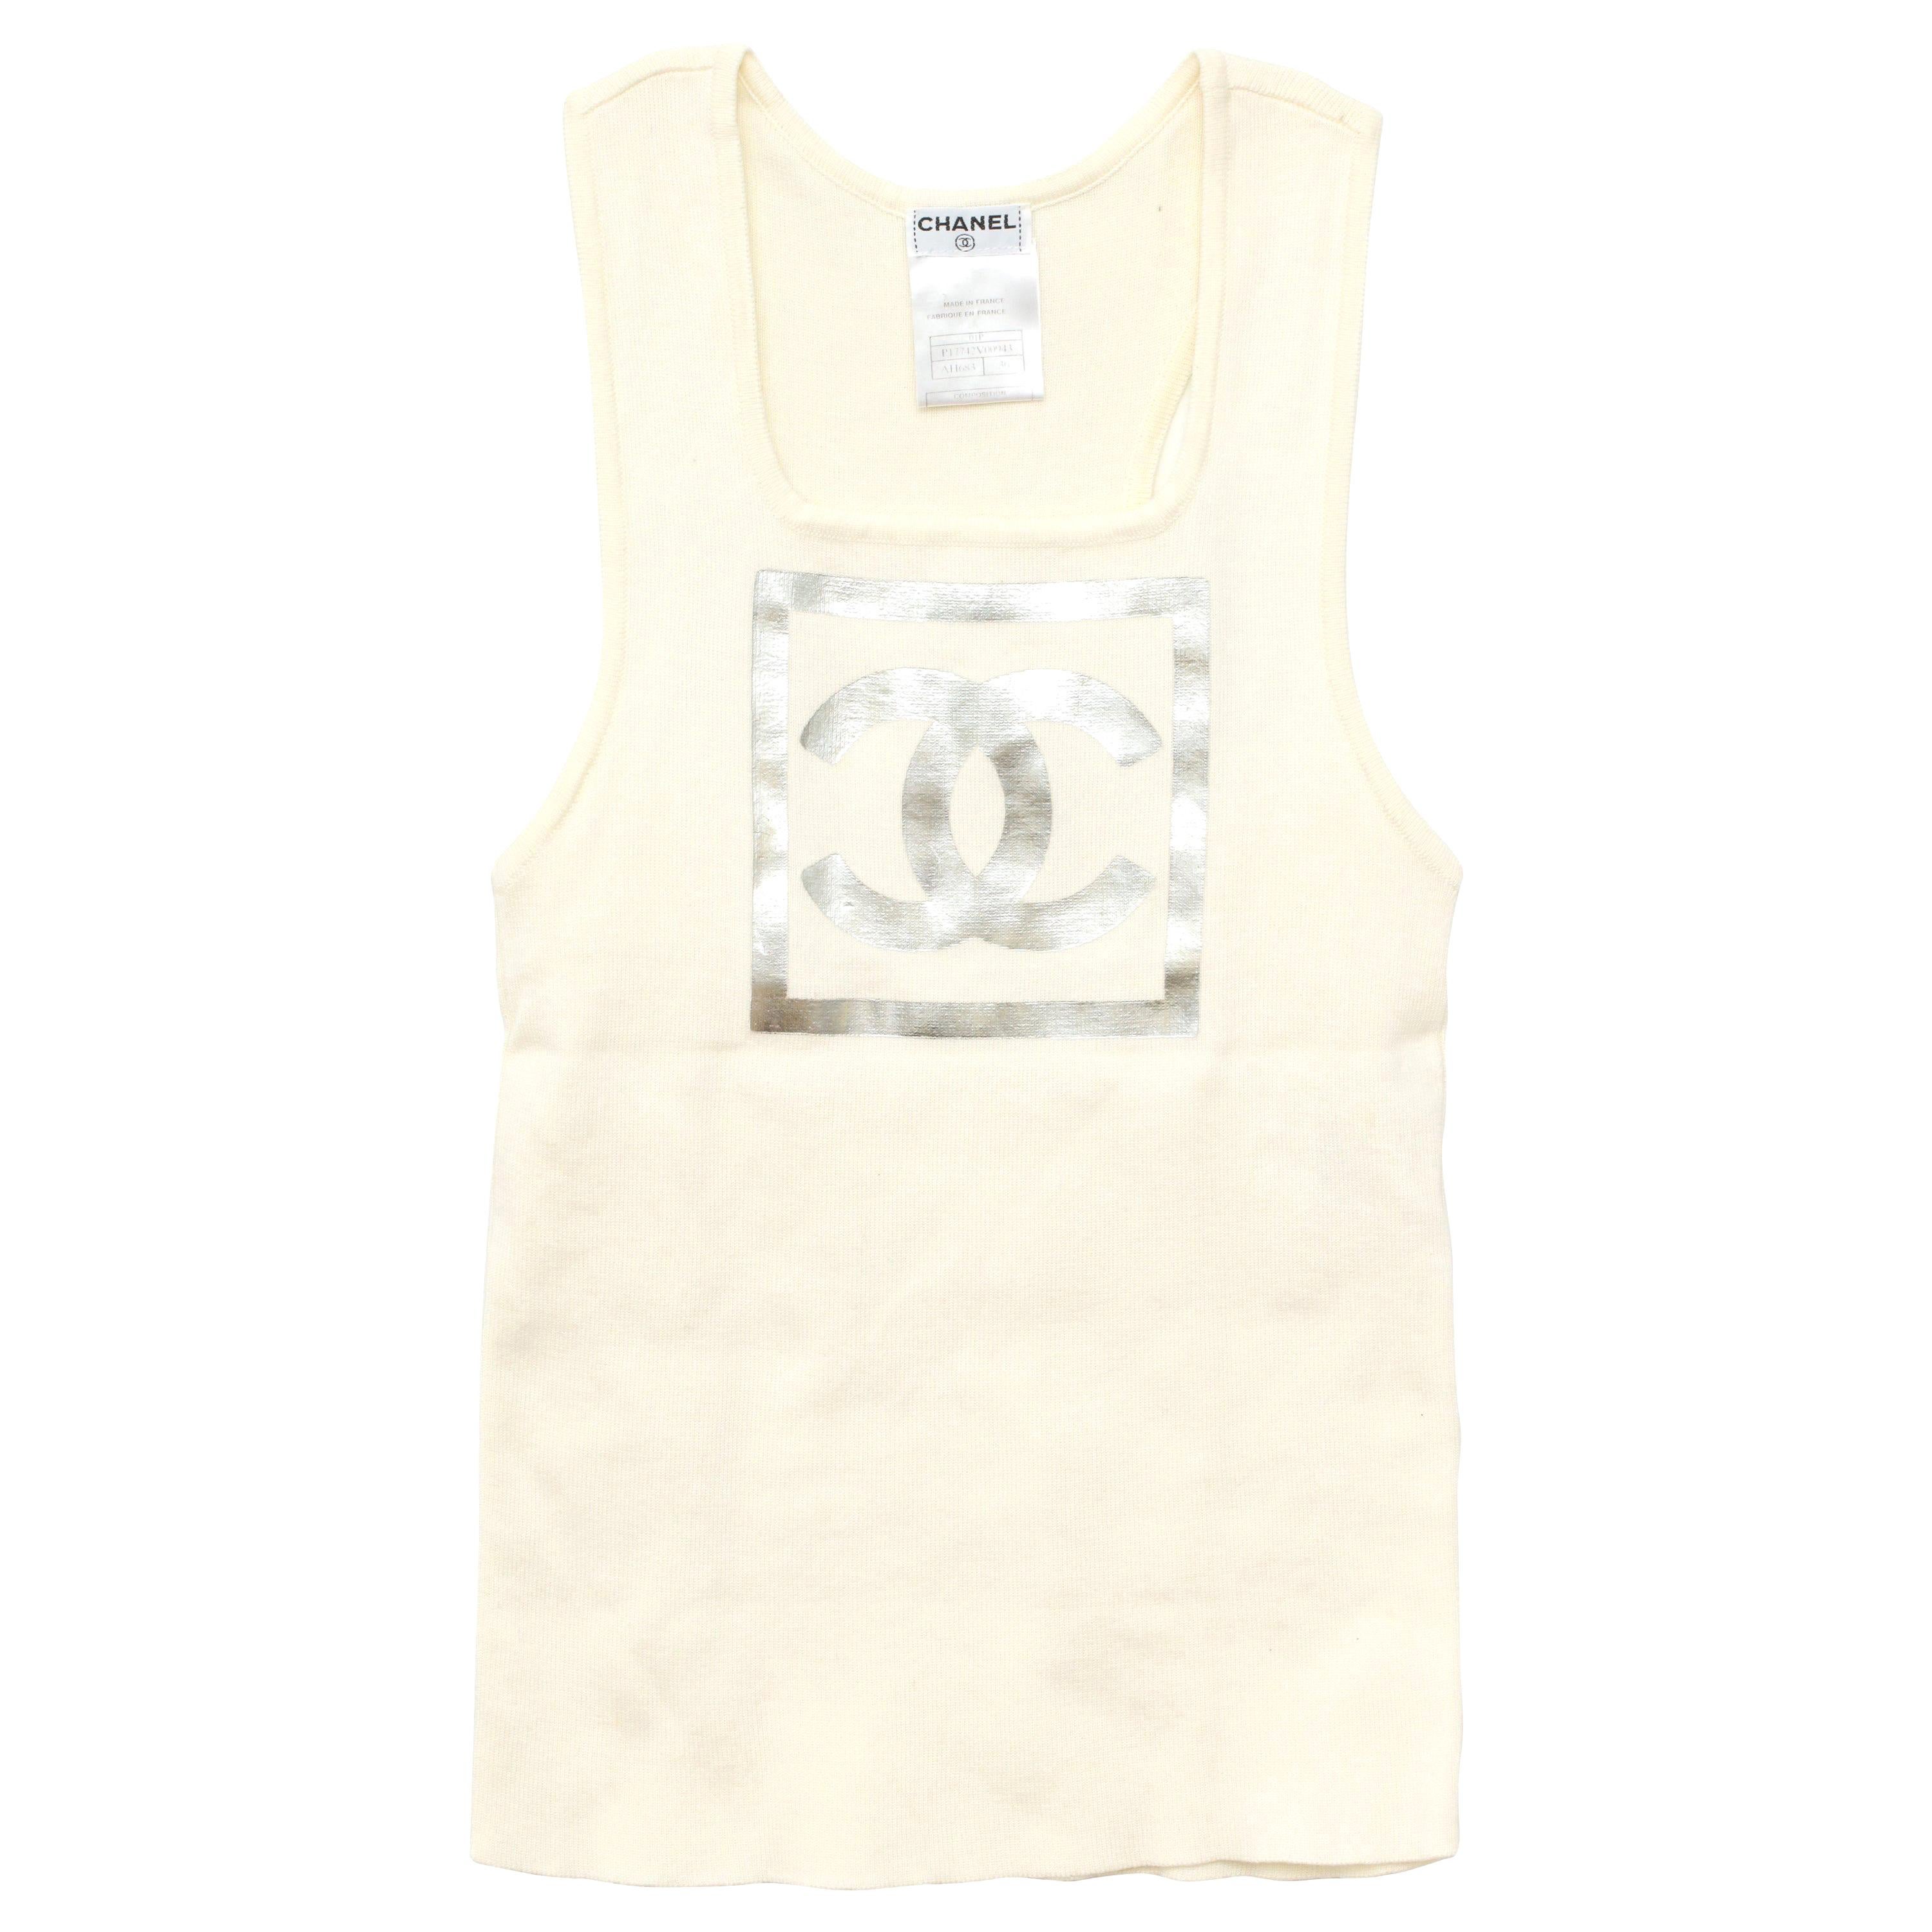 Chanel Sport gorgeous tank top with CC logos

Size: 36